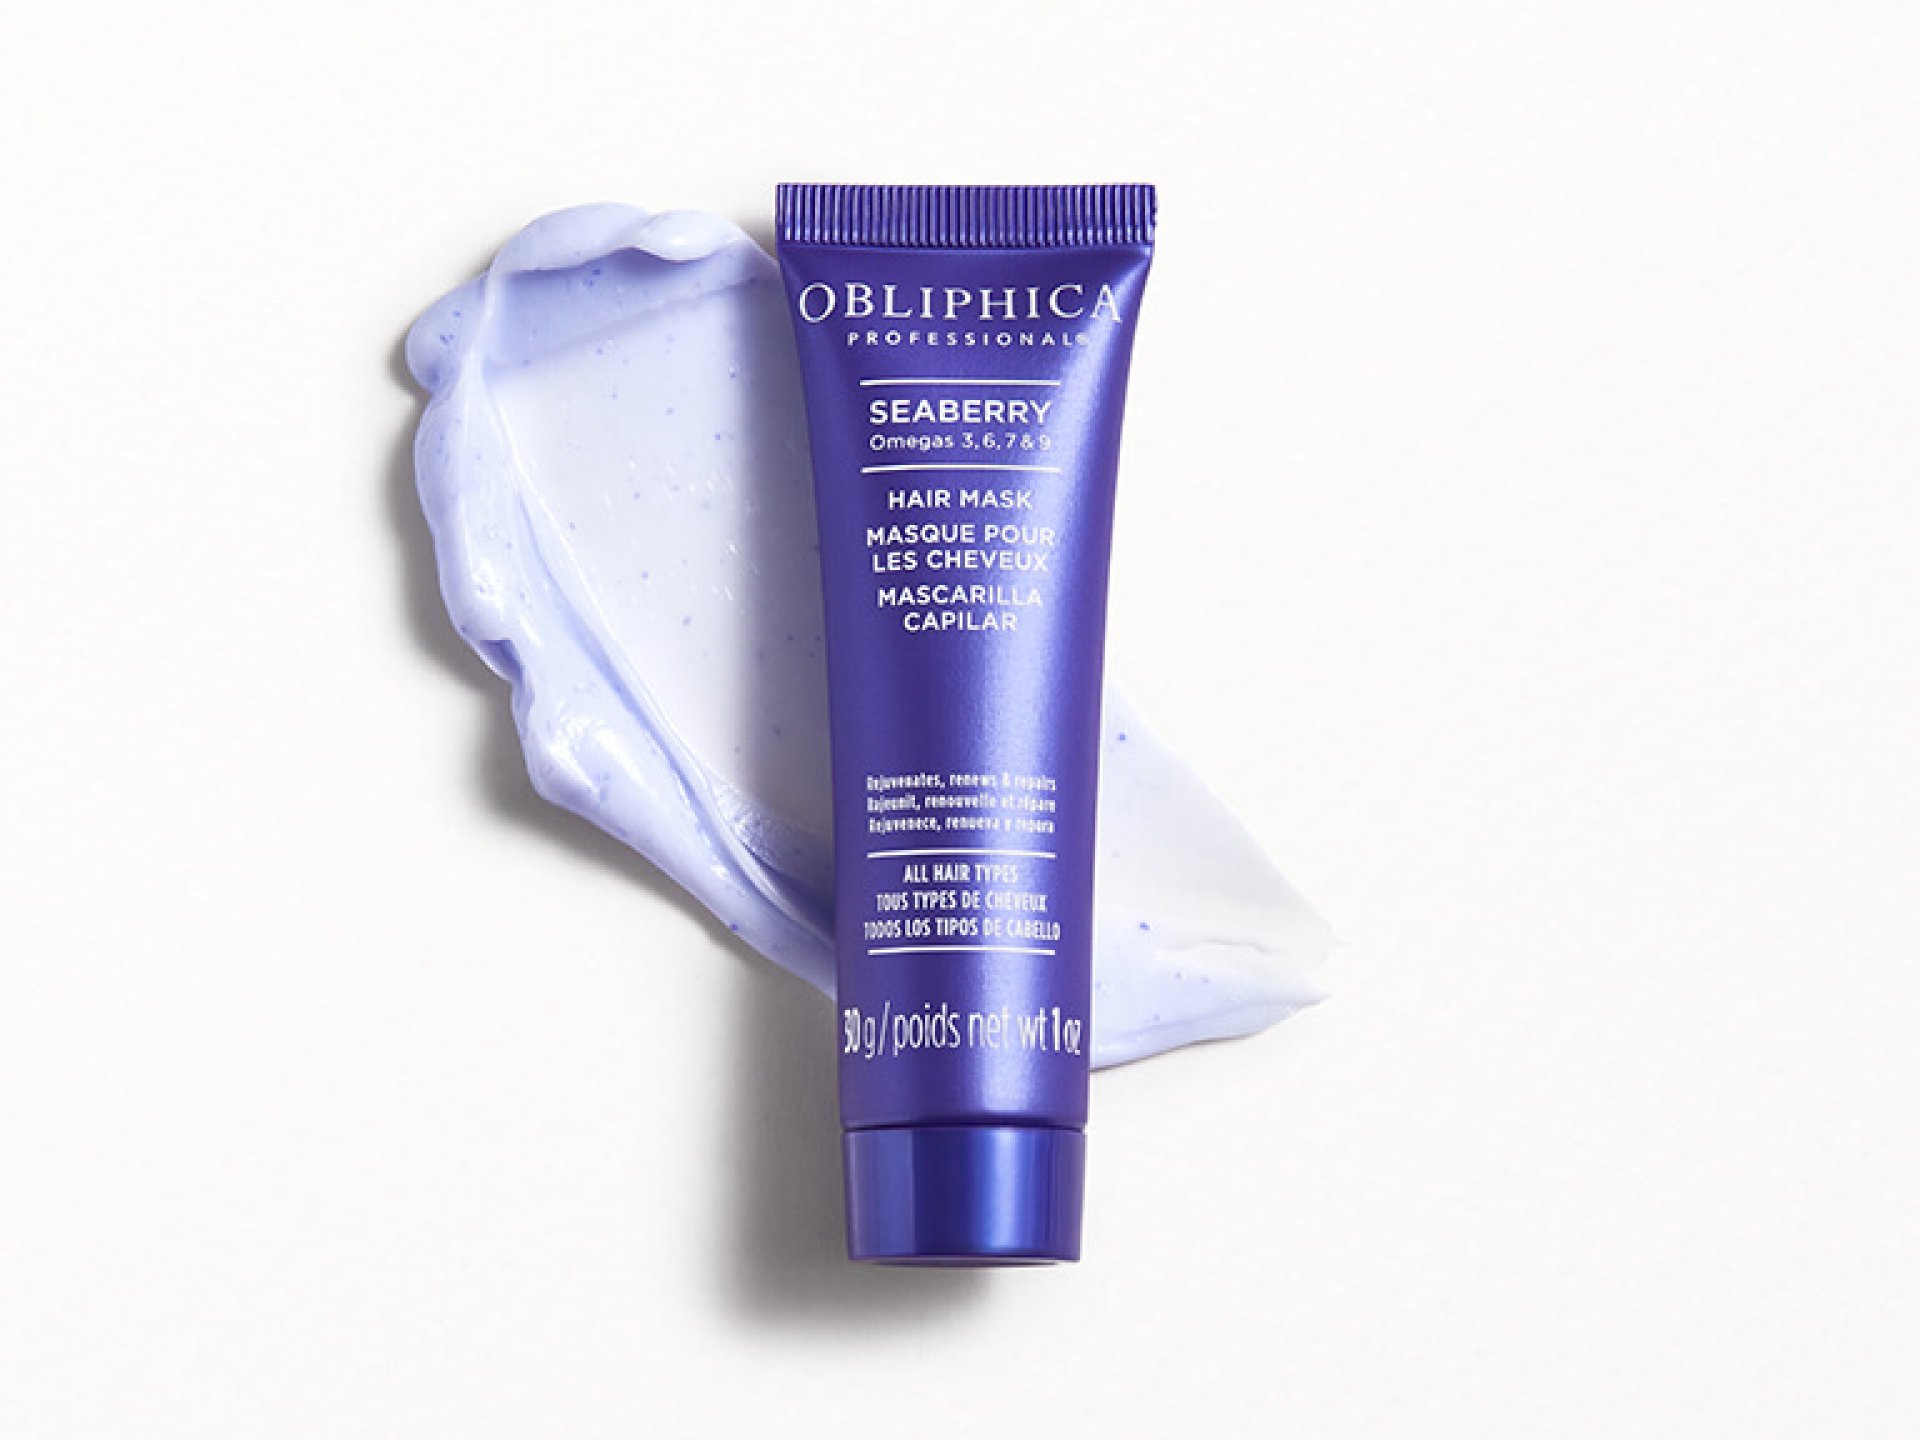 OBLIPHICA PROFESSIONAL Seaberry Hair Mask